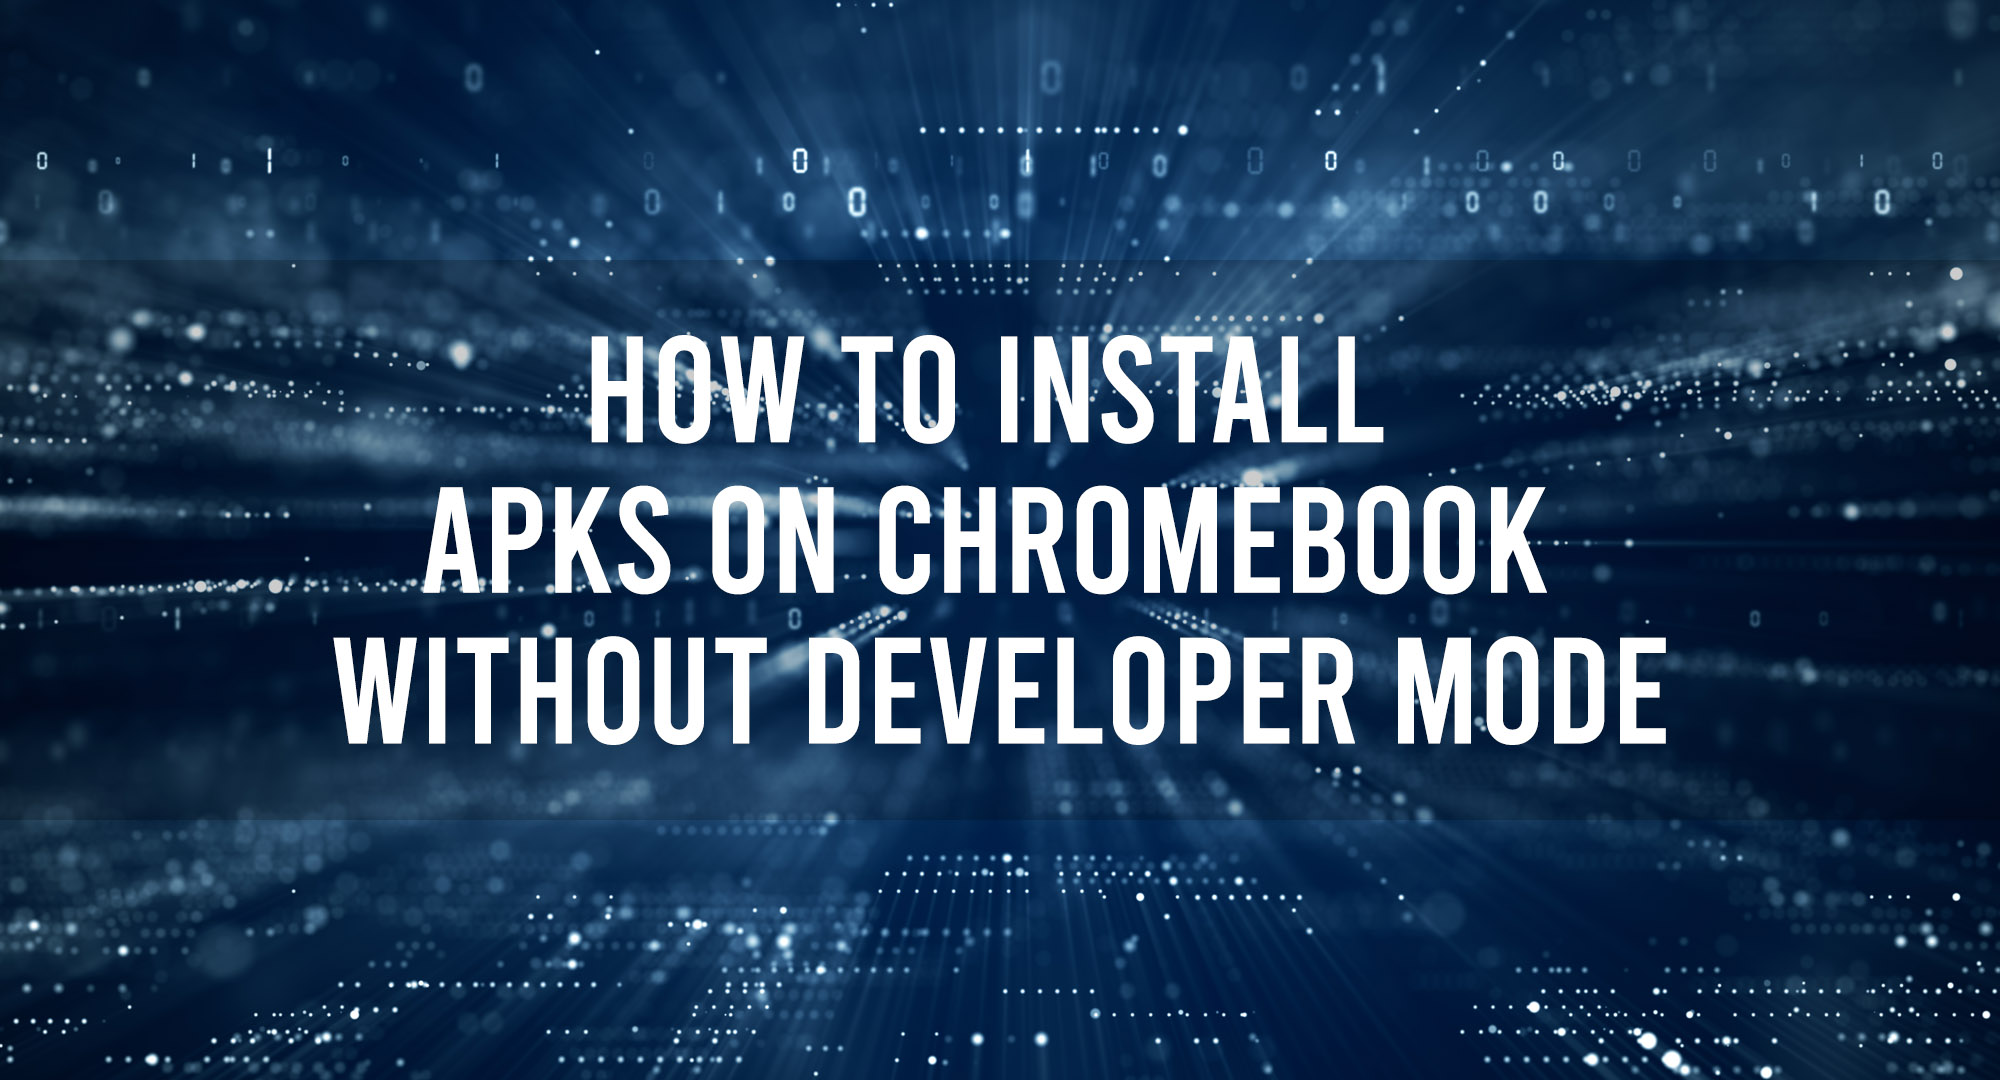 How to install apks on chromebook without developer mode